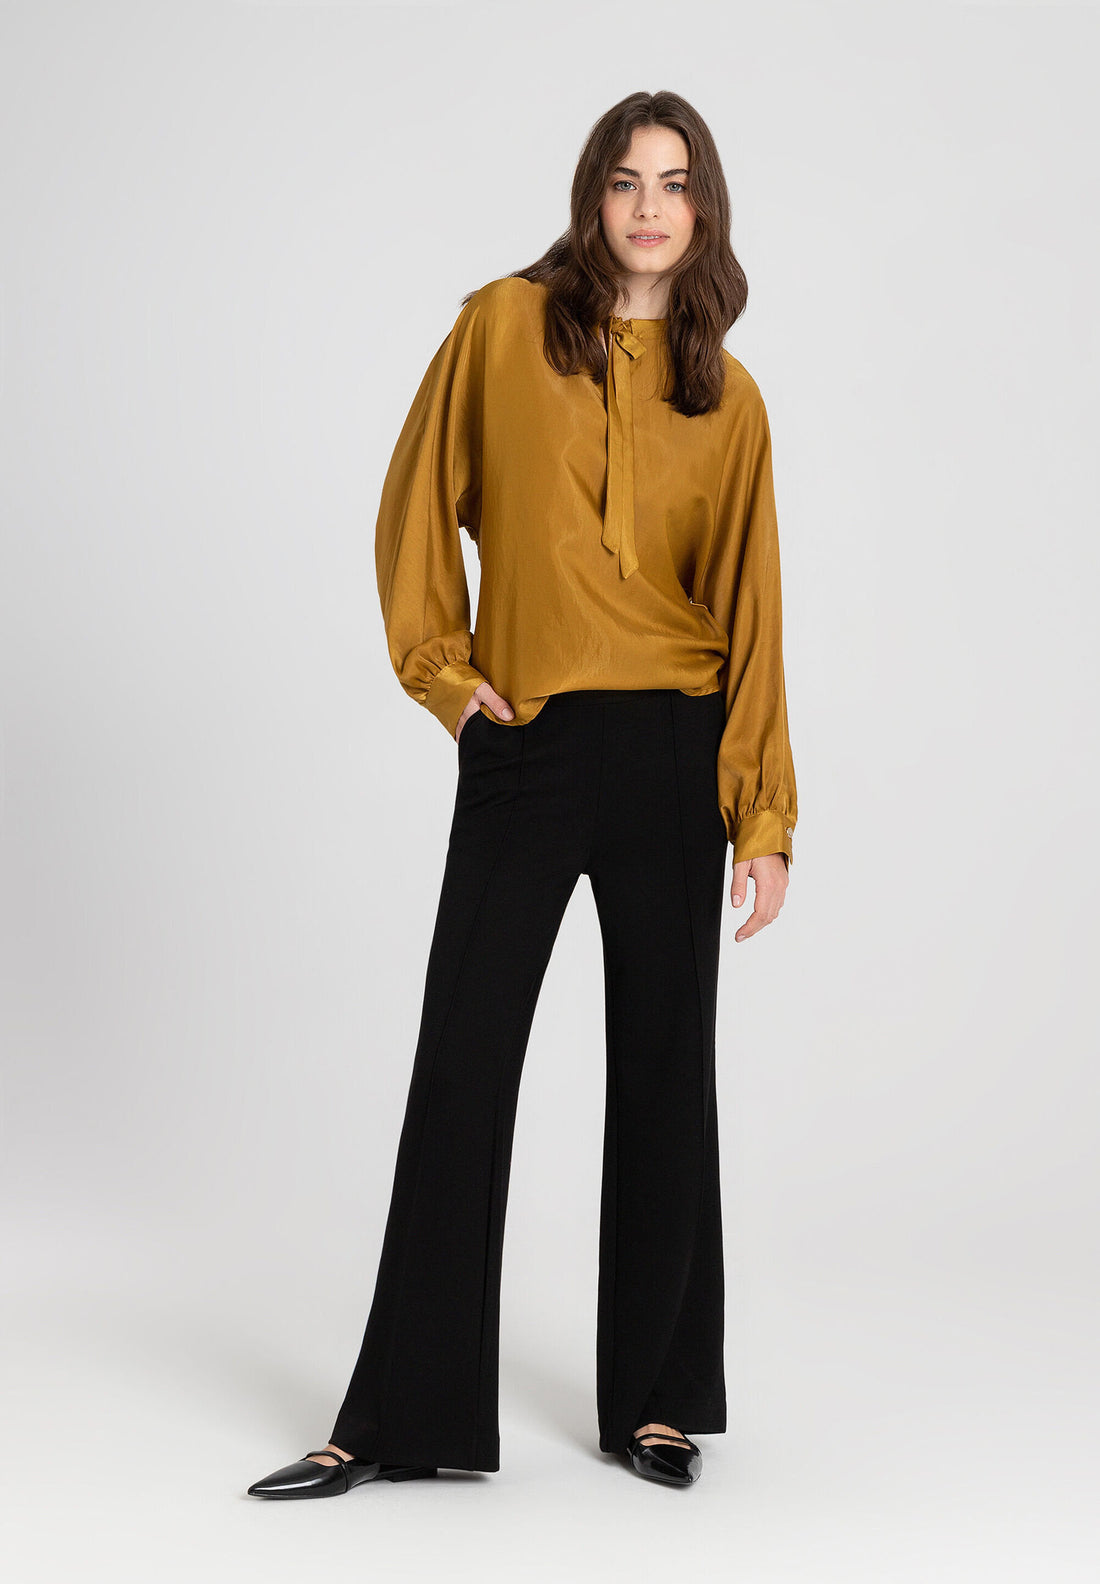 Mustard Yellow Satin Blouse With Bow_31122056_0175_02